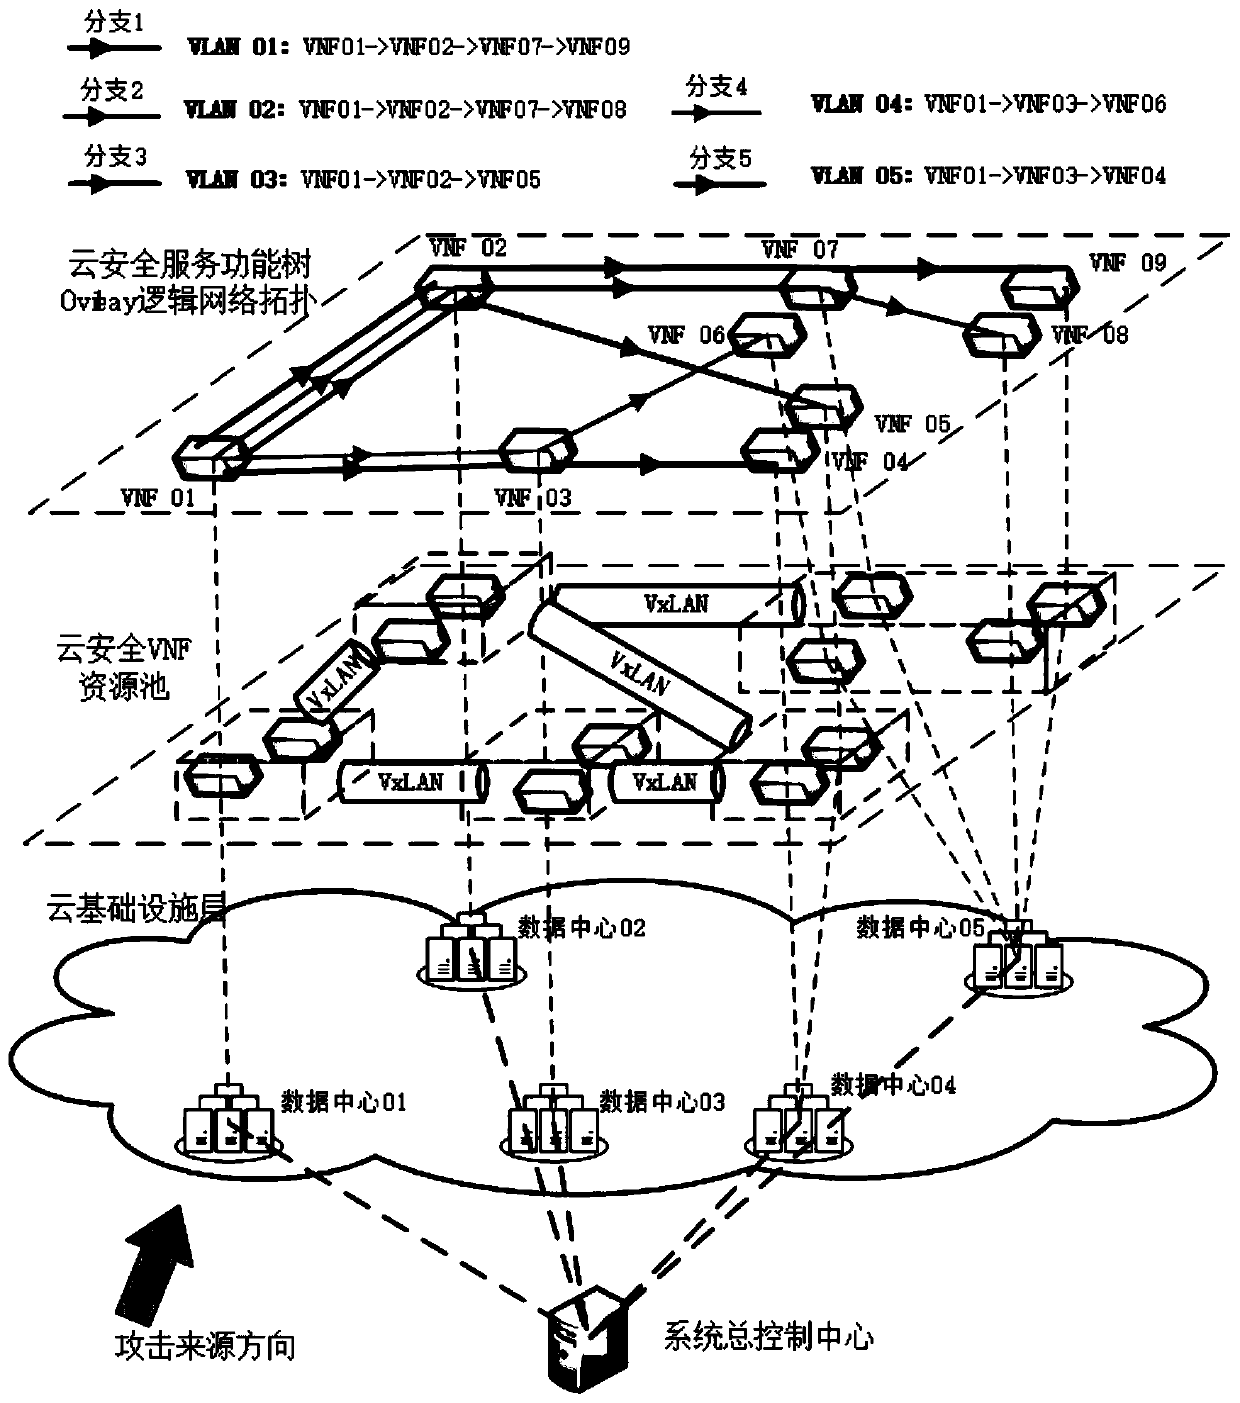 Cloud security service function tree network intrusion detection system